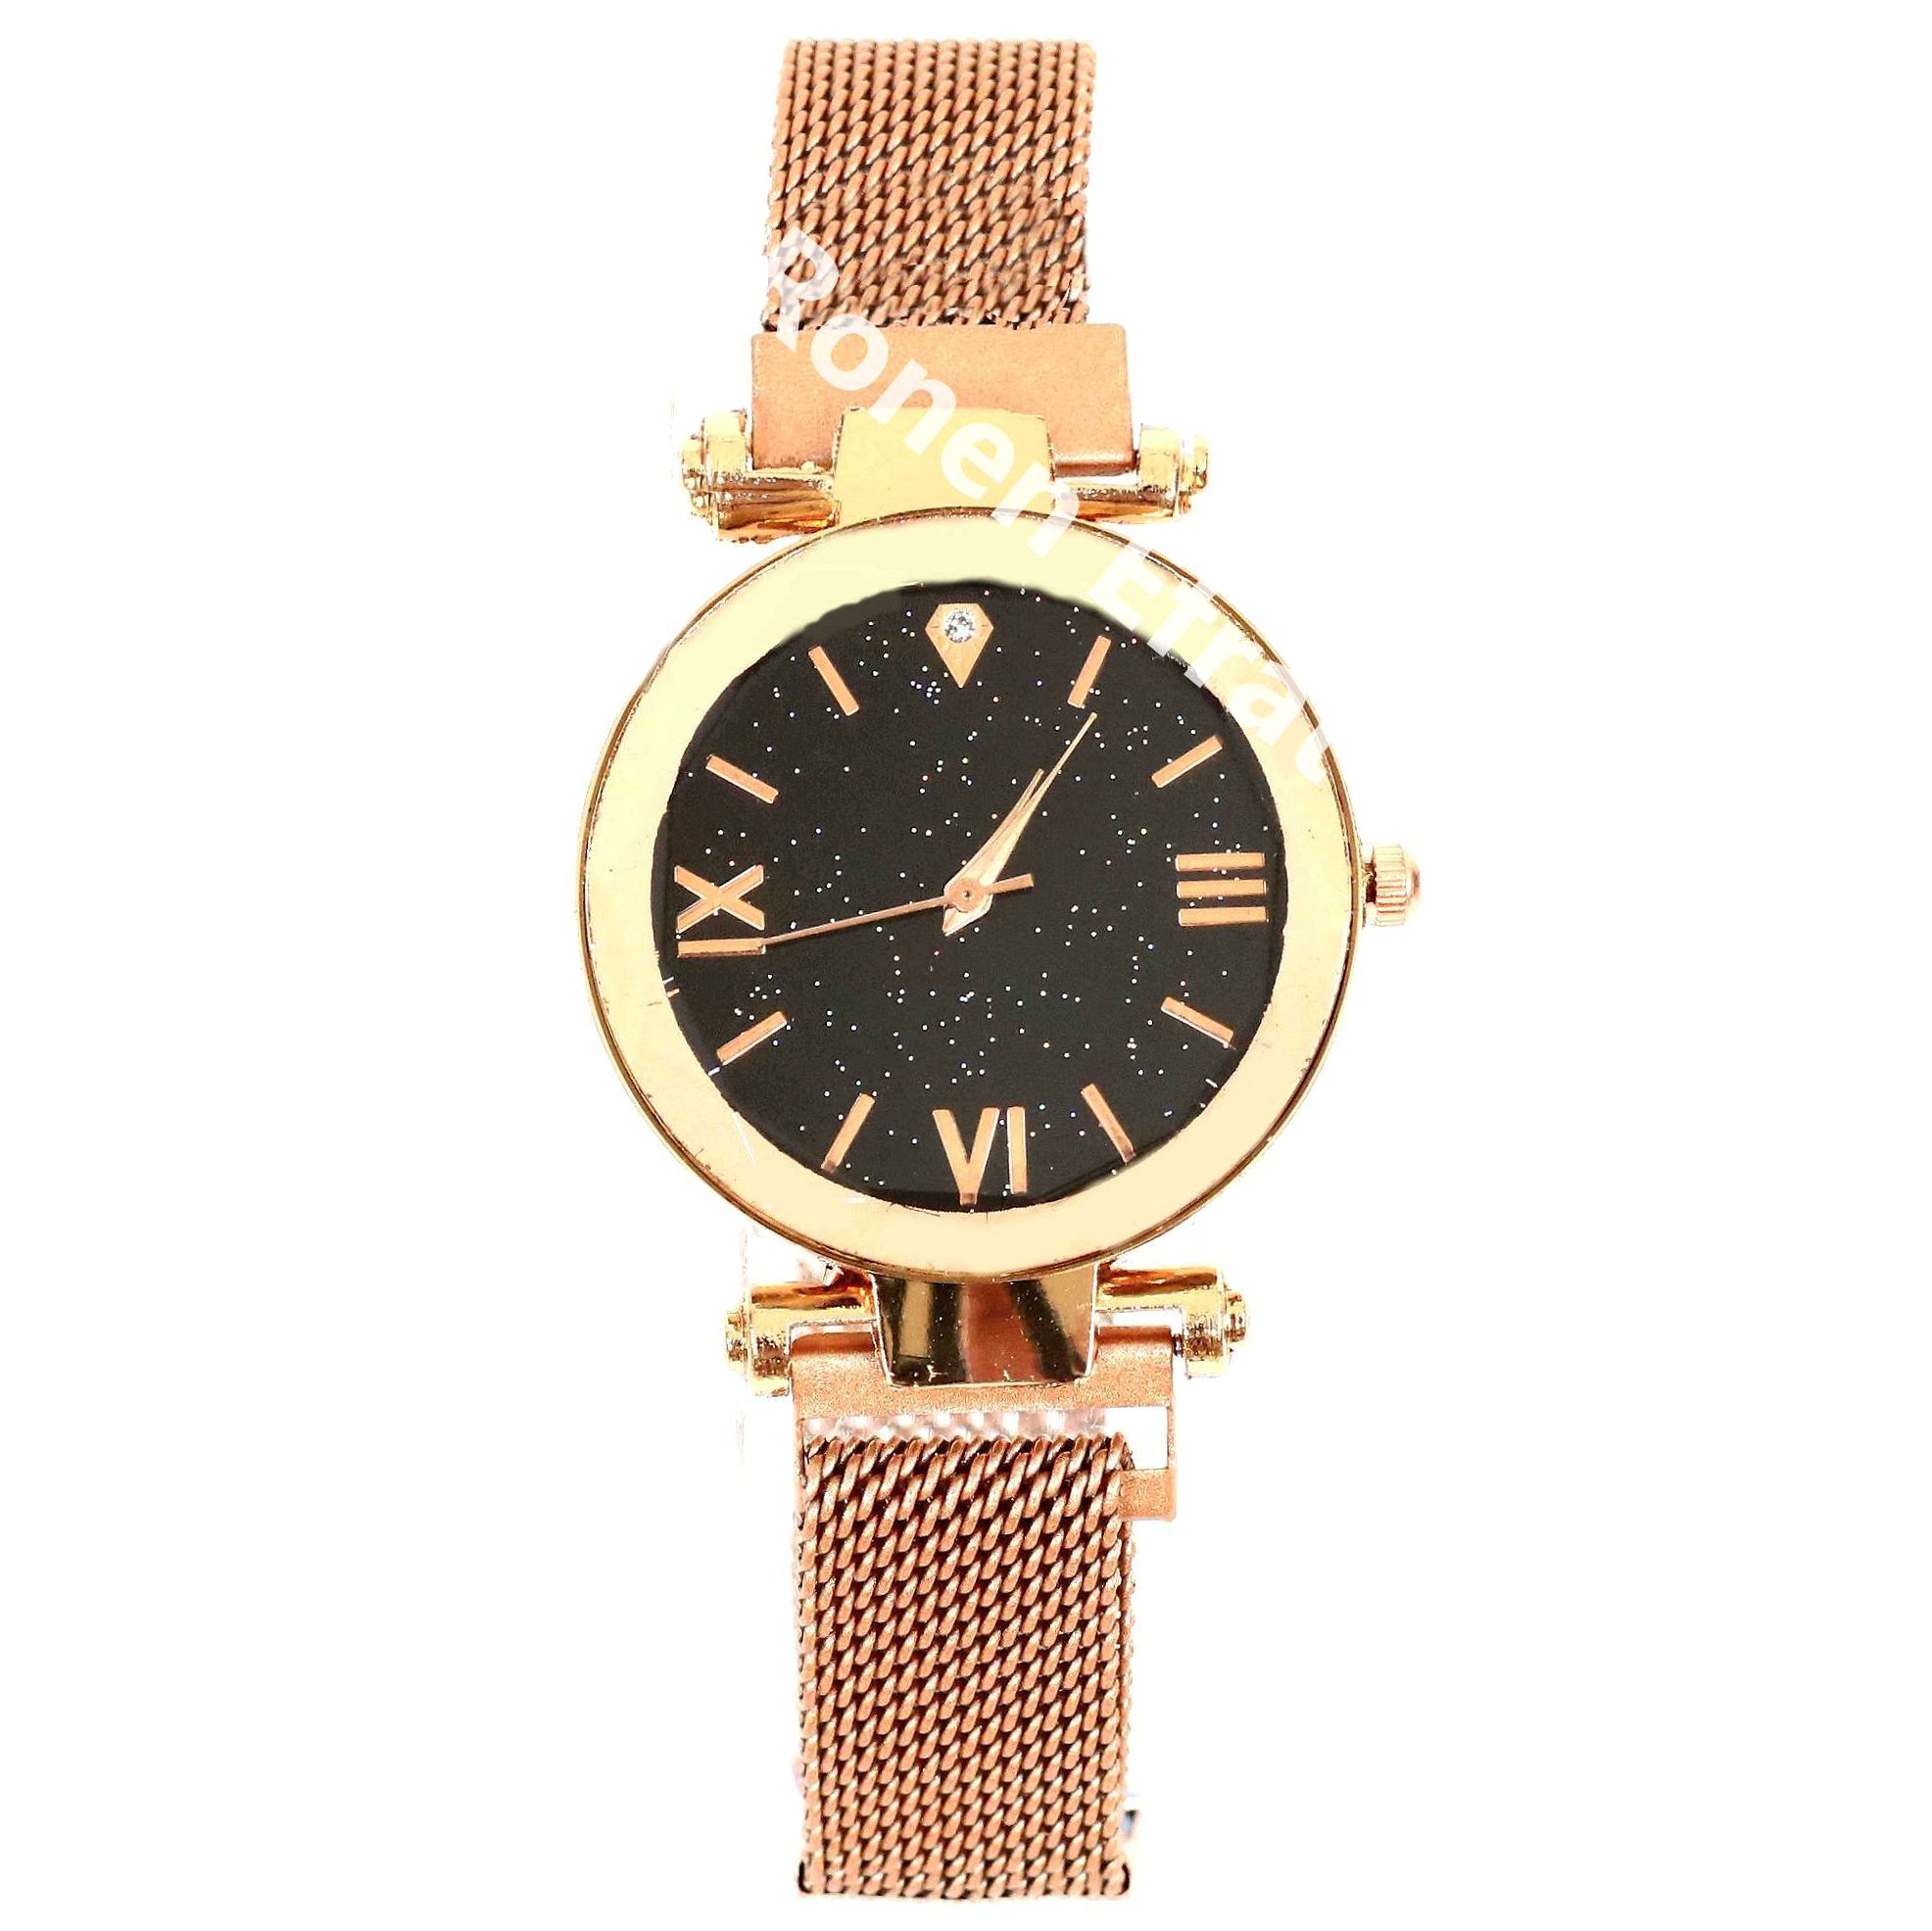 A stunning jewel watch rose with fashionable look color gold a in